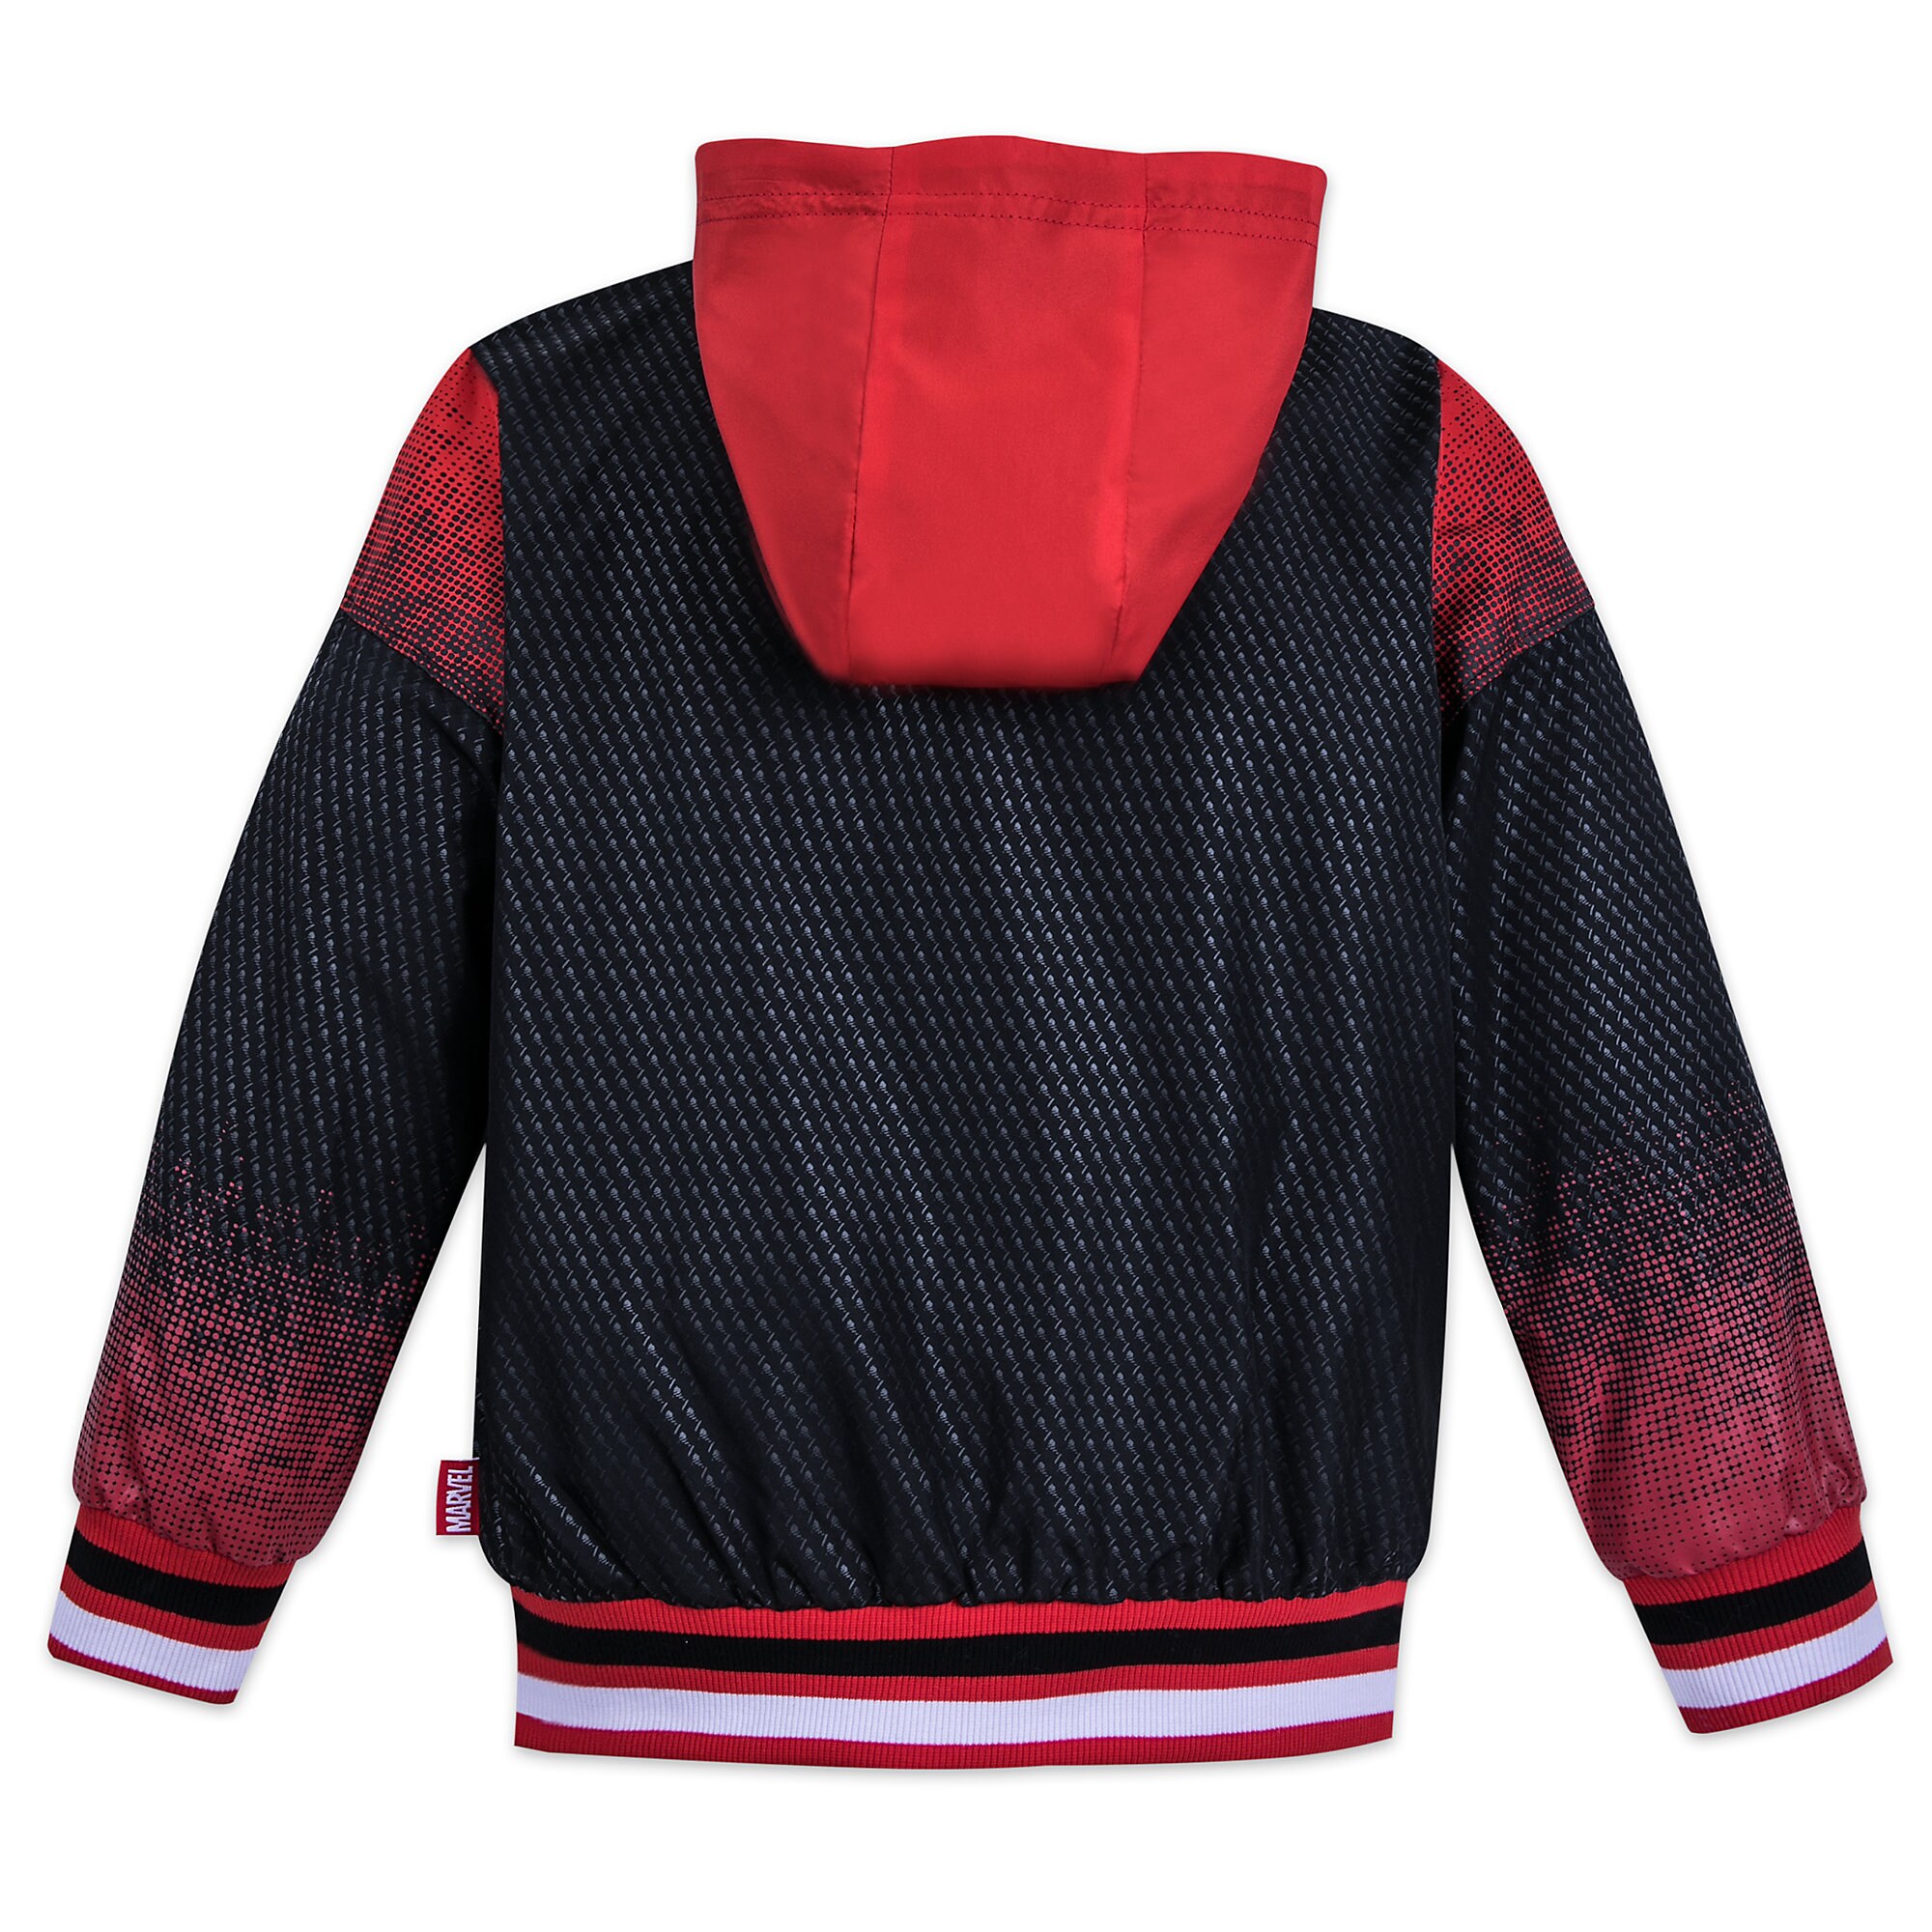 Spider-Man: Into the Spider-Verse Hooded Jacket for Boys